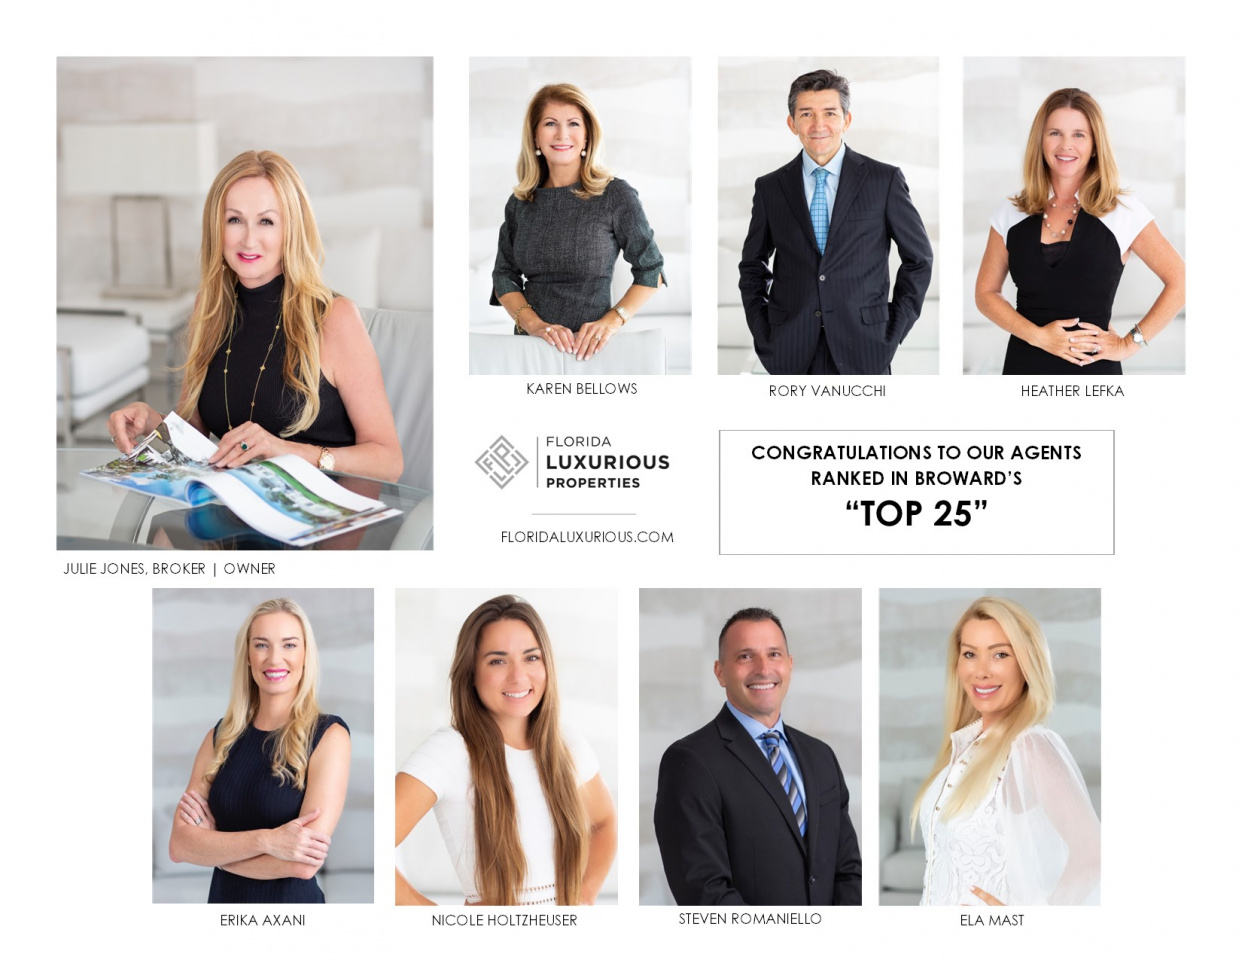 Florida Luxurious Properties' Eight team members Ranked in Broward County's "Top 25" Agents for 2021